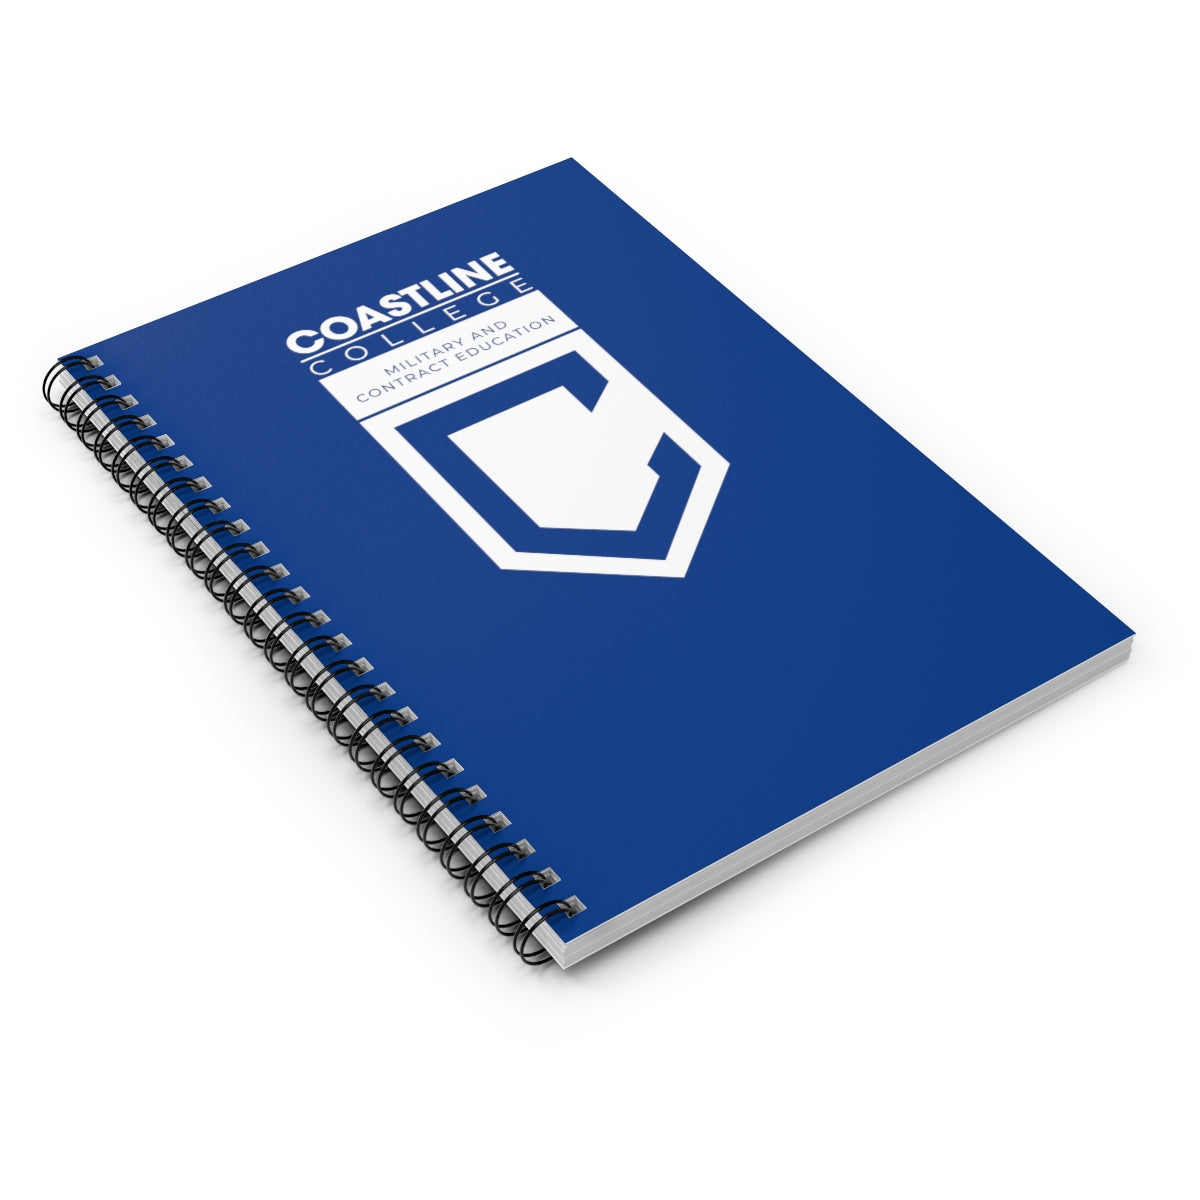 Coastline Military & Contract Ed Spiral Notebook - Ruled Line (Dark Blue)